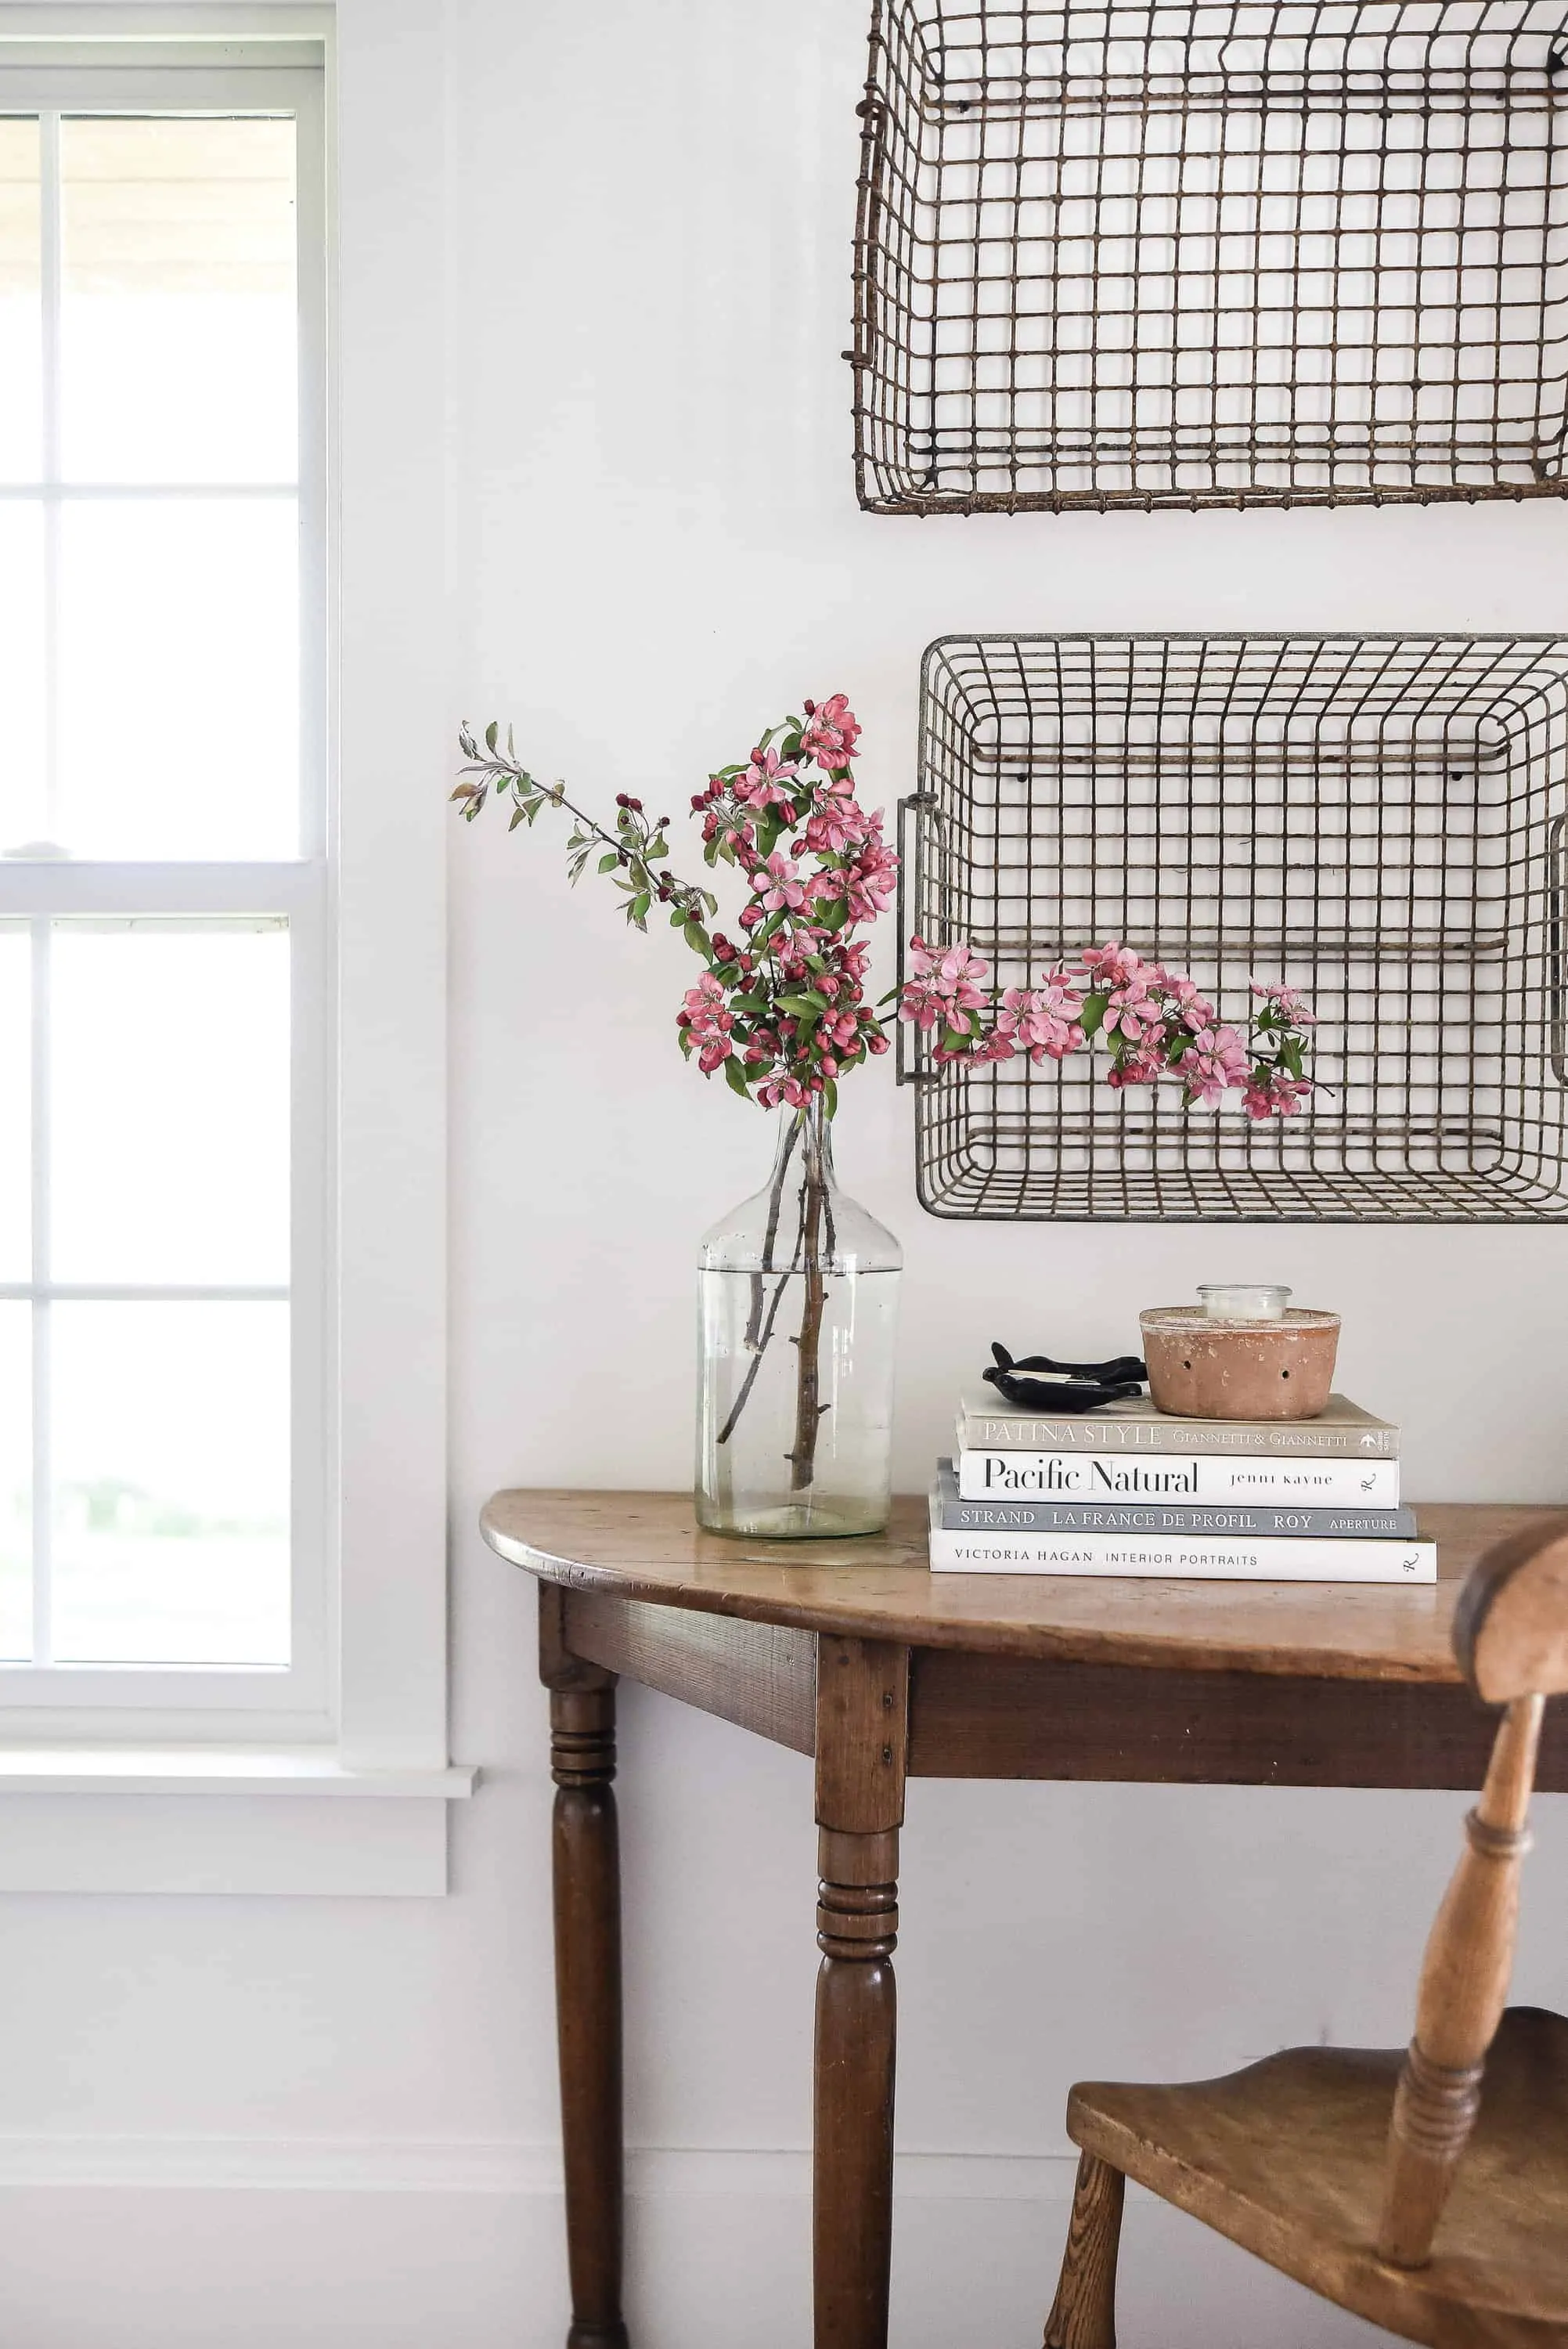 As the weather warms up, freshen up your home with some simple summer home decorating ideas!